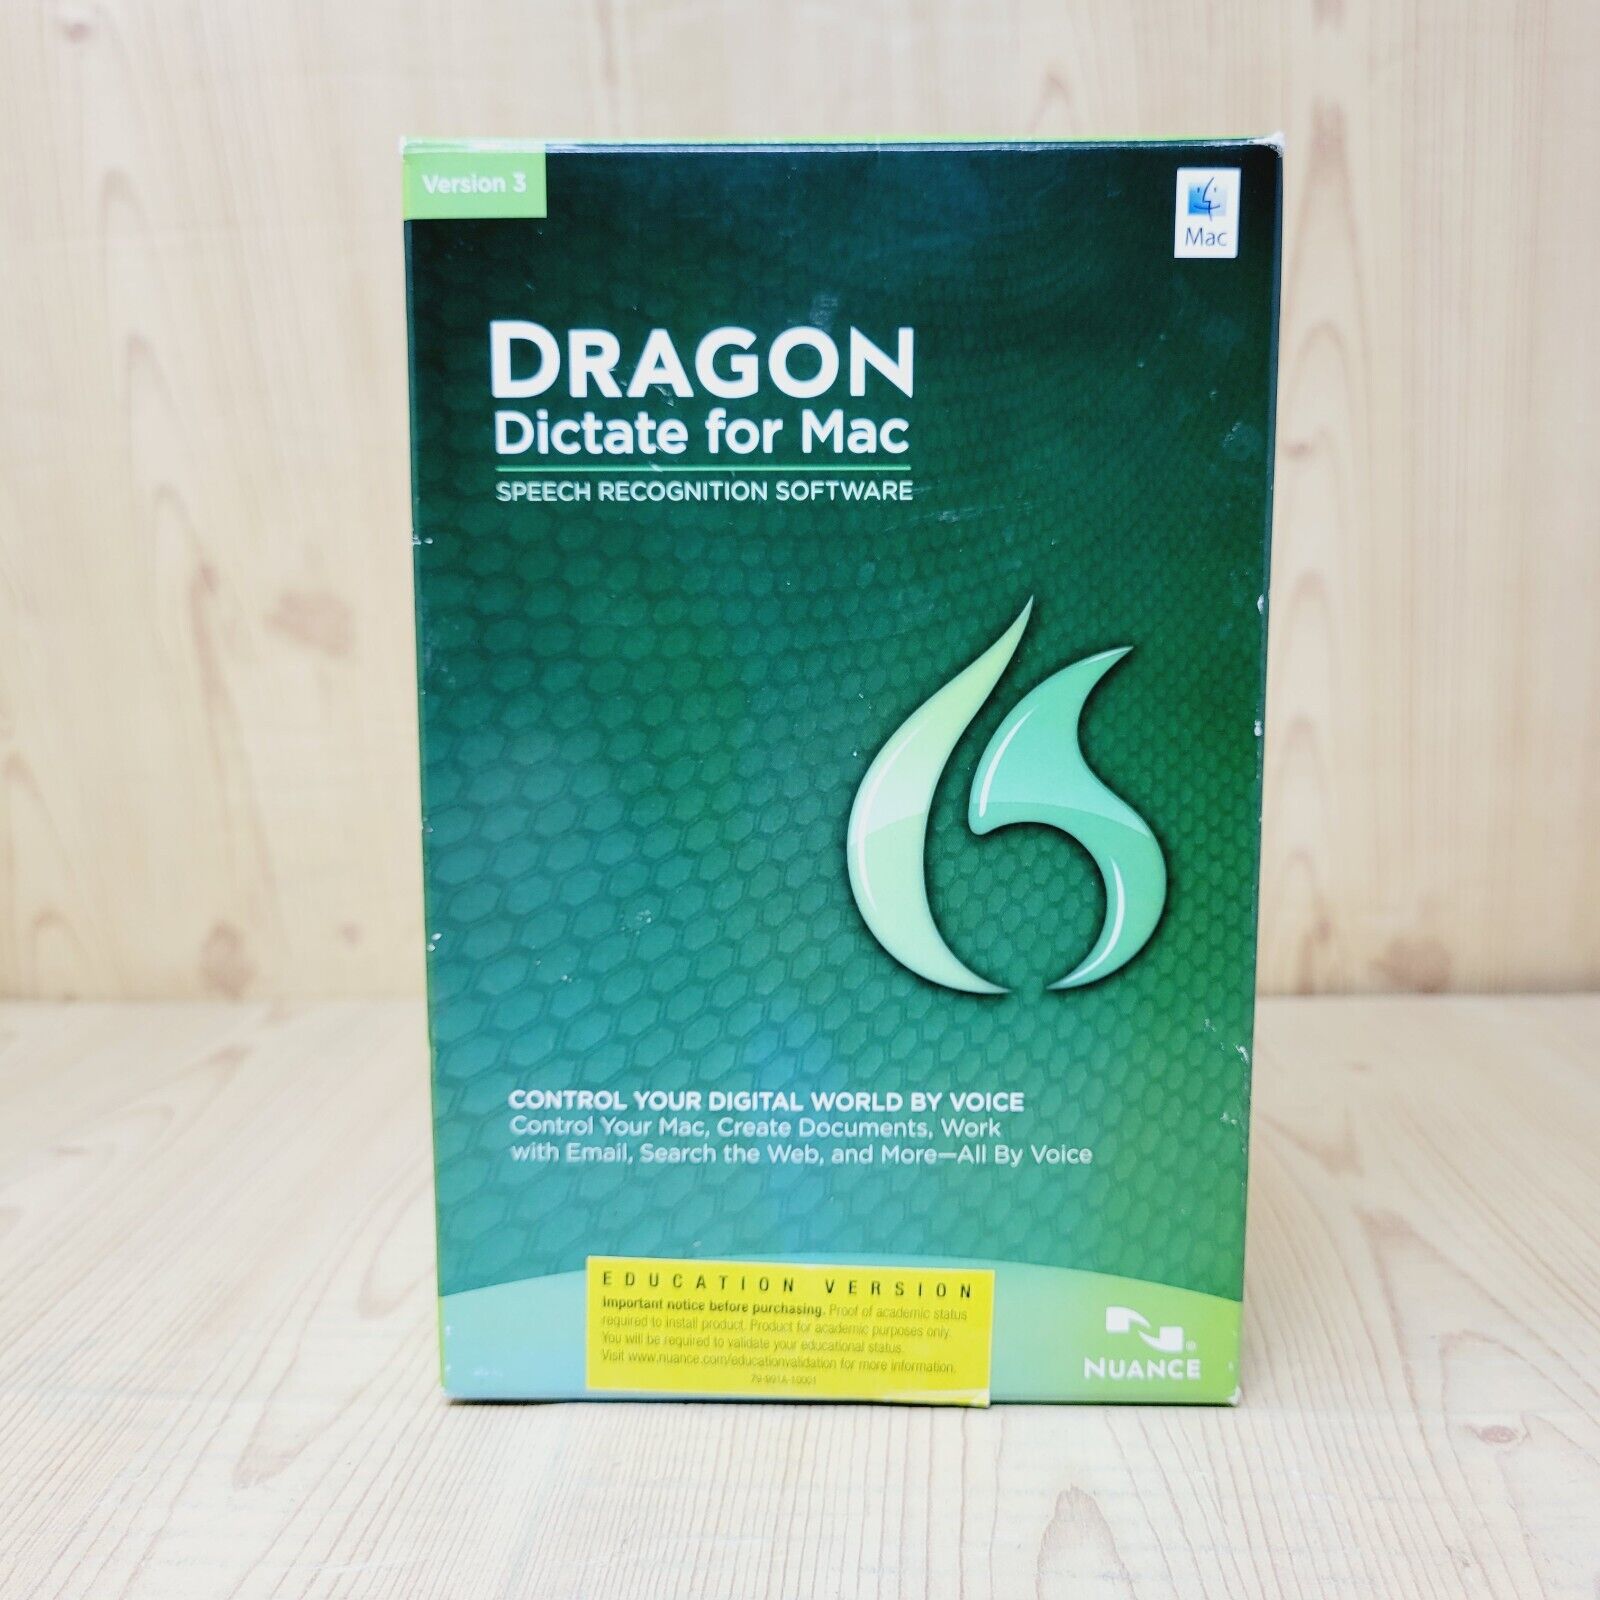 Dragon Dictate for Mac Version 3 Speech Recognition & Headset New Open Box